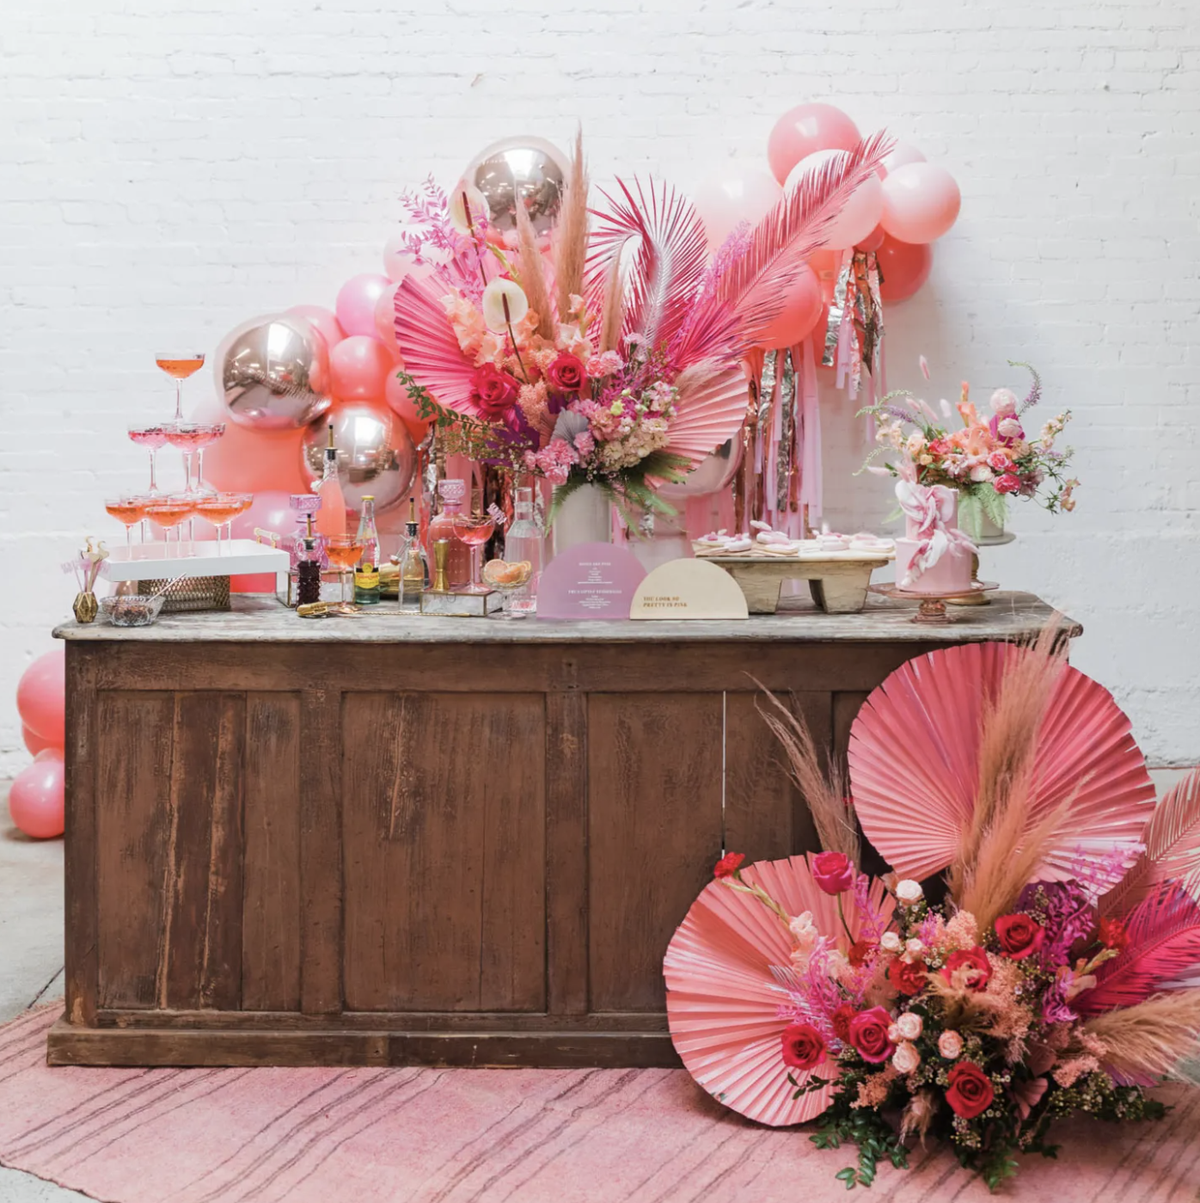 12 Bridal Shower Themes to Spoil Your Favorite Bride-to-Be